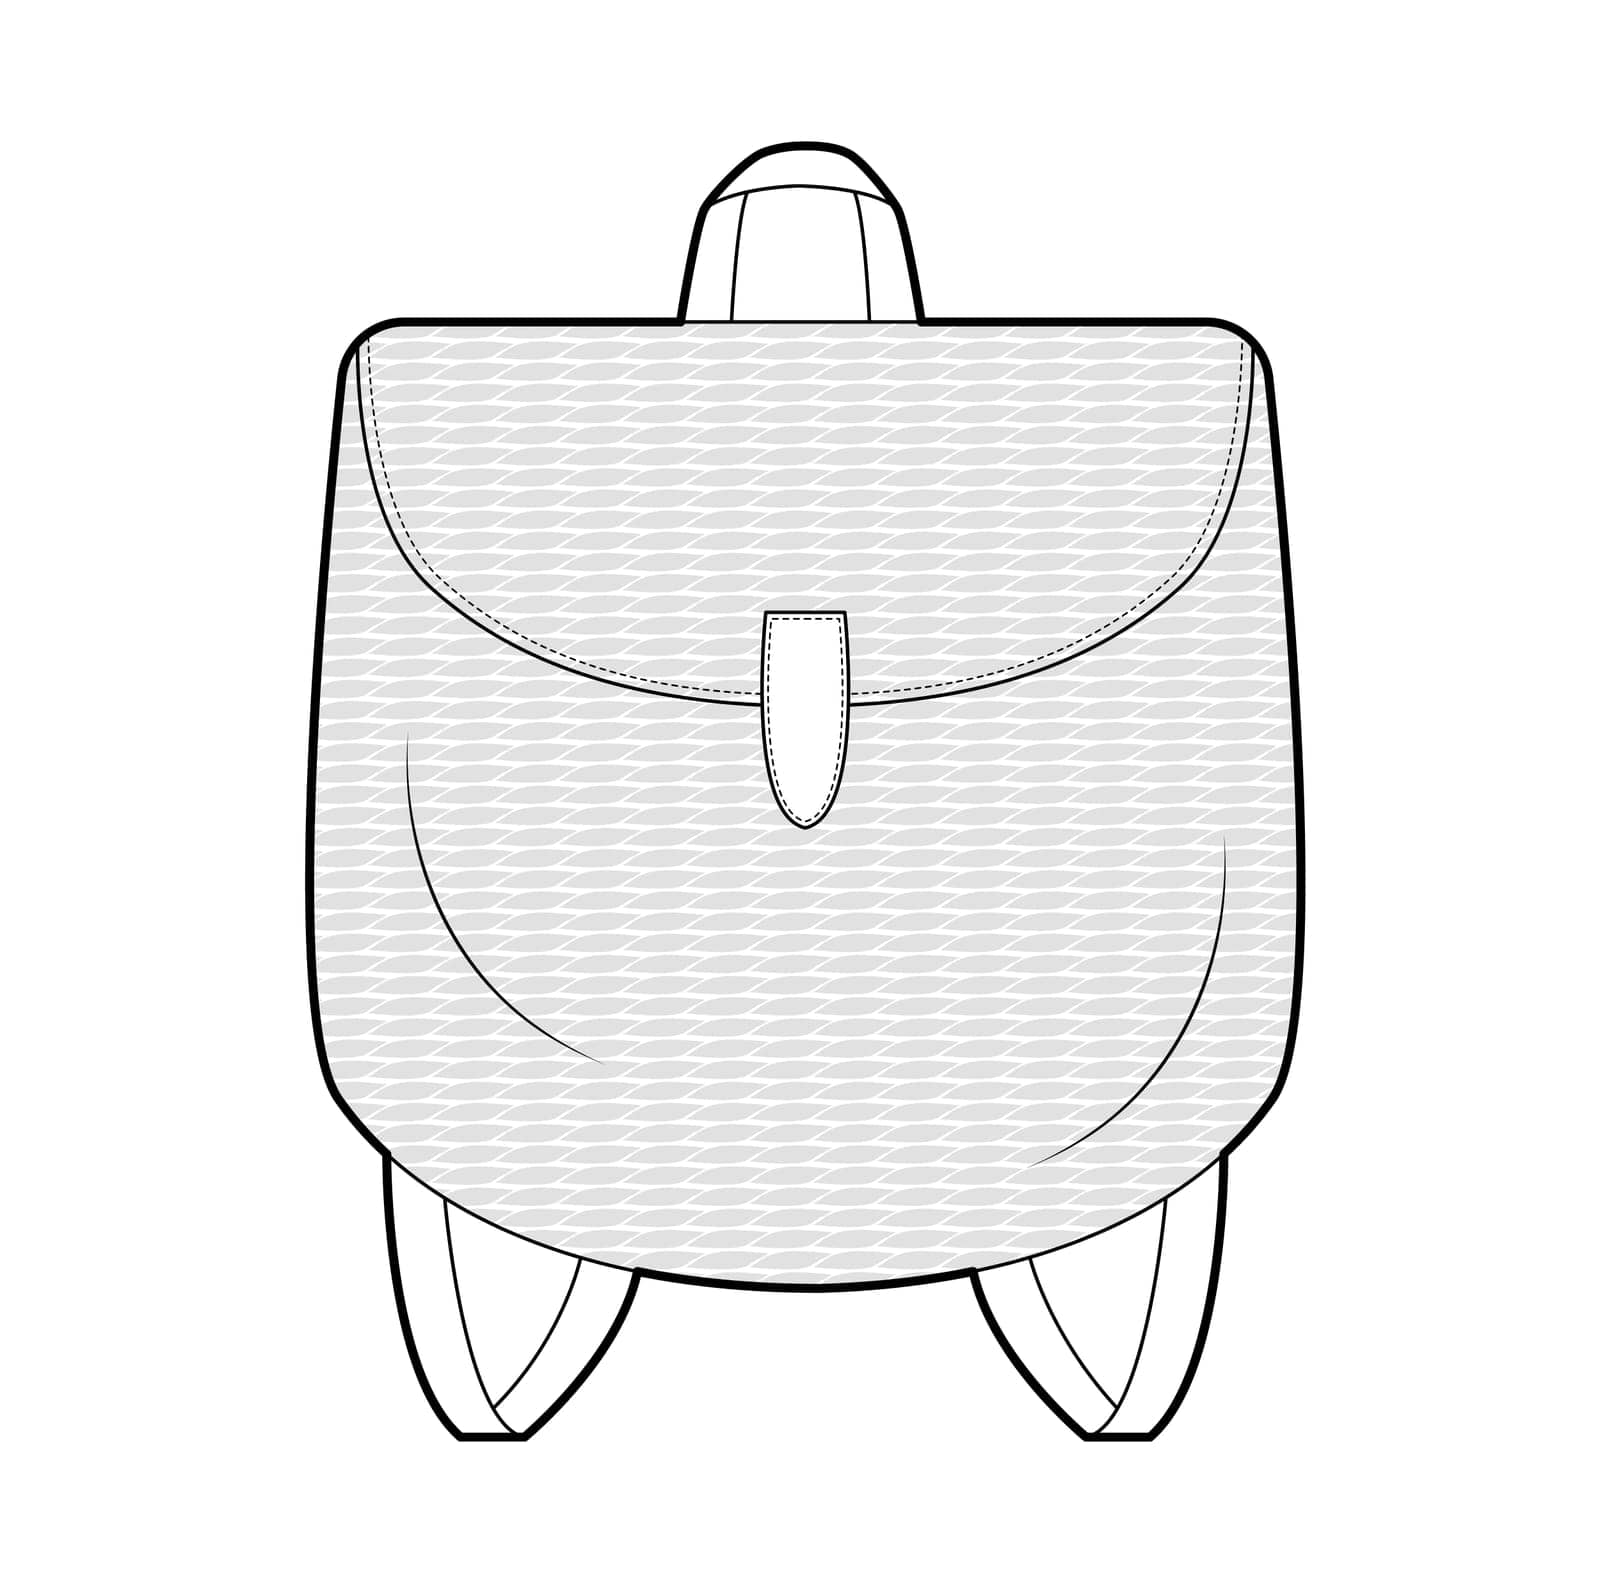 Straw backpack silhouette bag. Fashion accessory technical illustration. Vector schoolbag front view for Men, women by Vectoressa